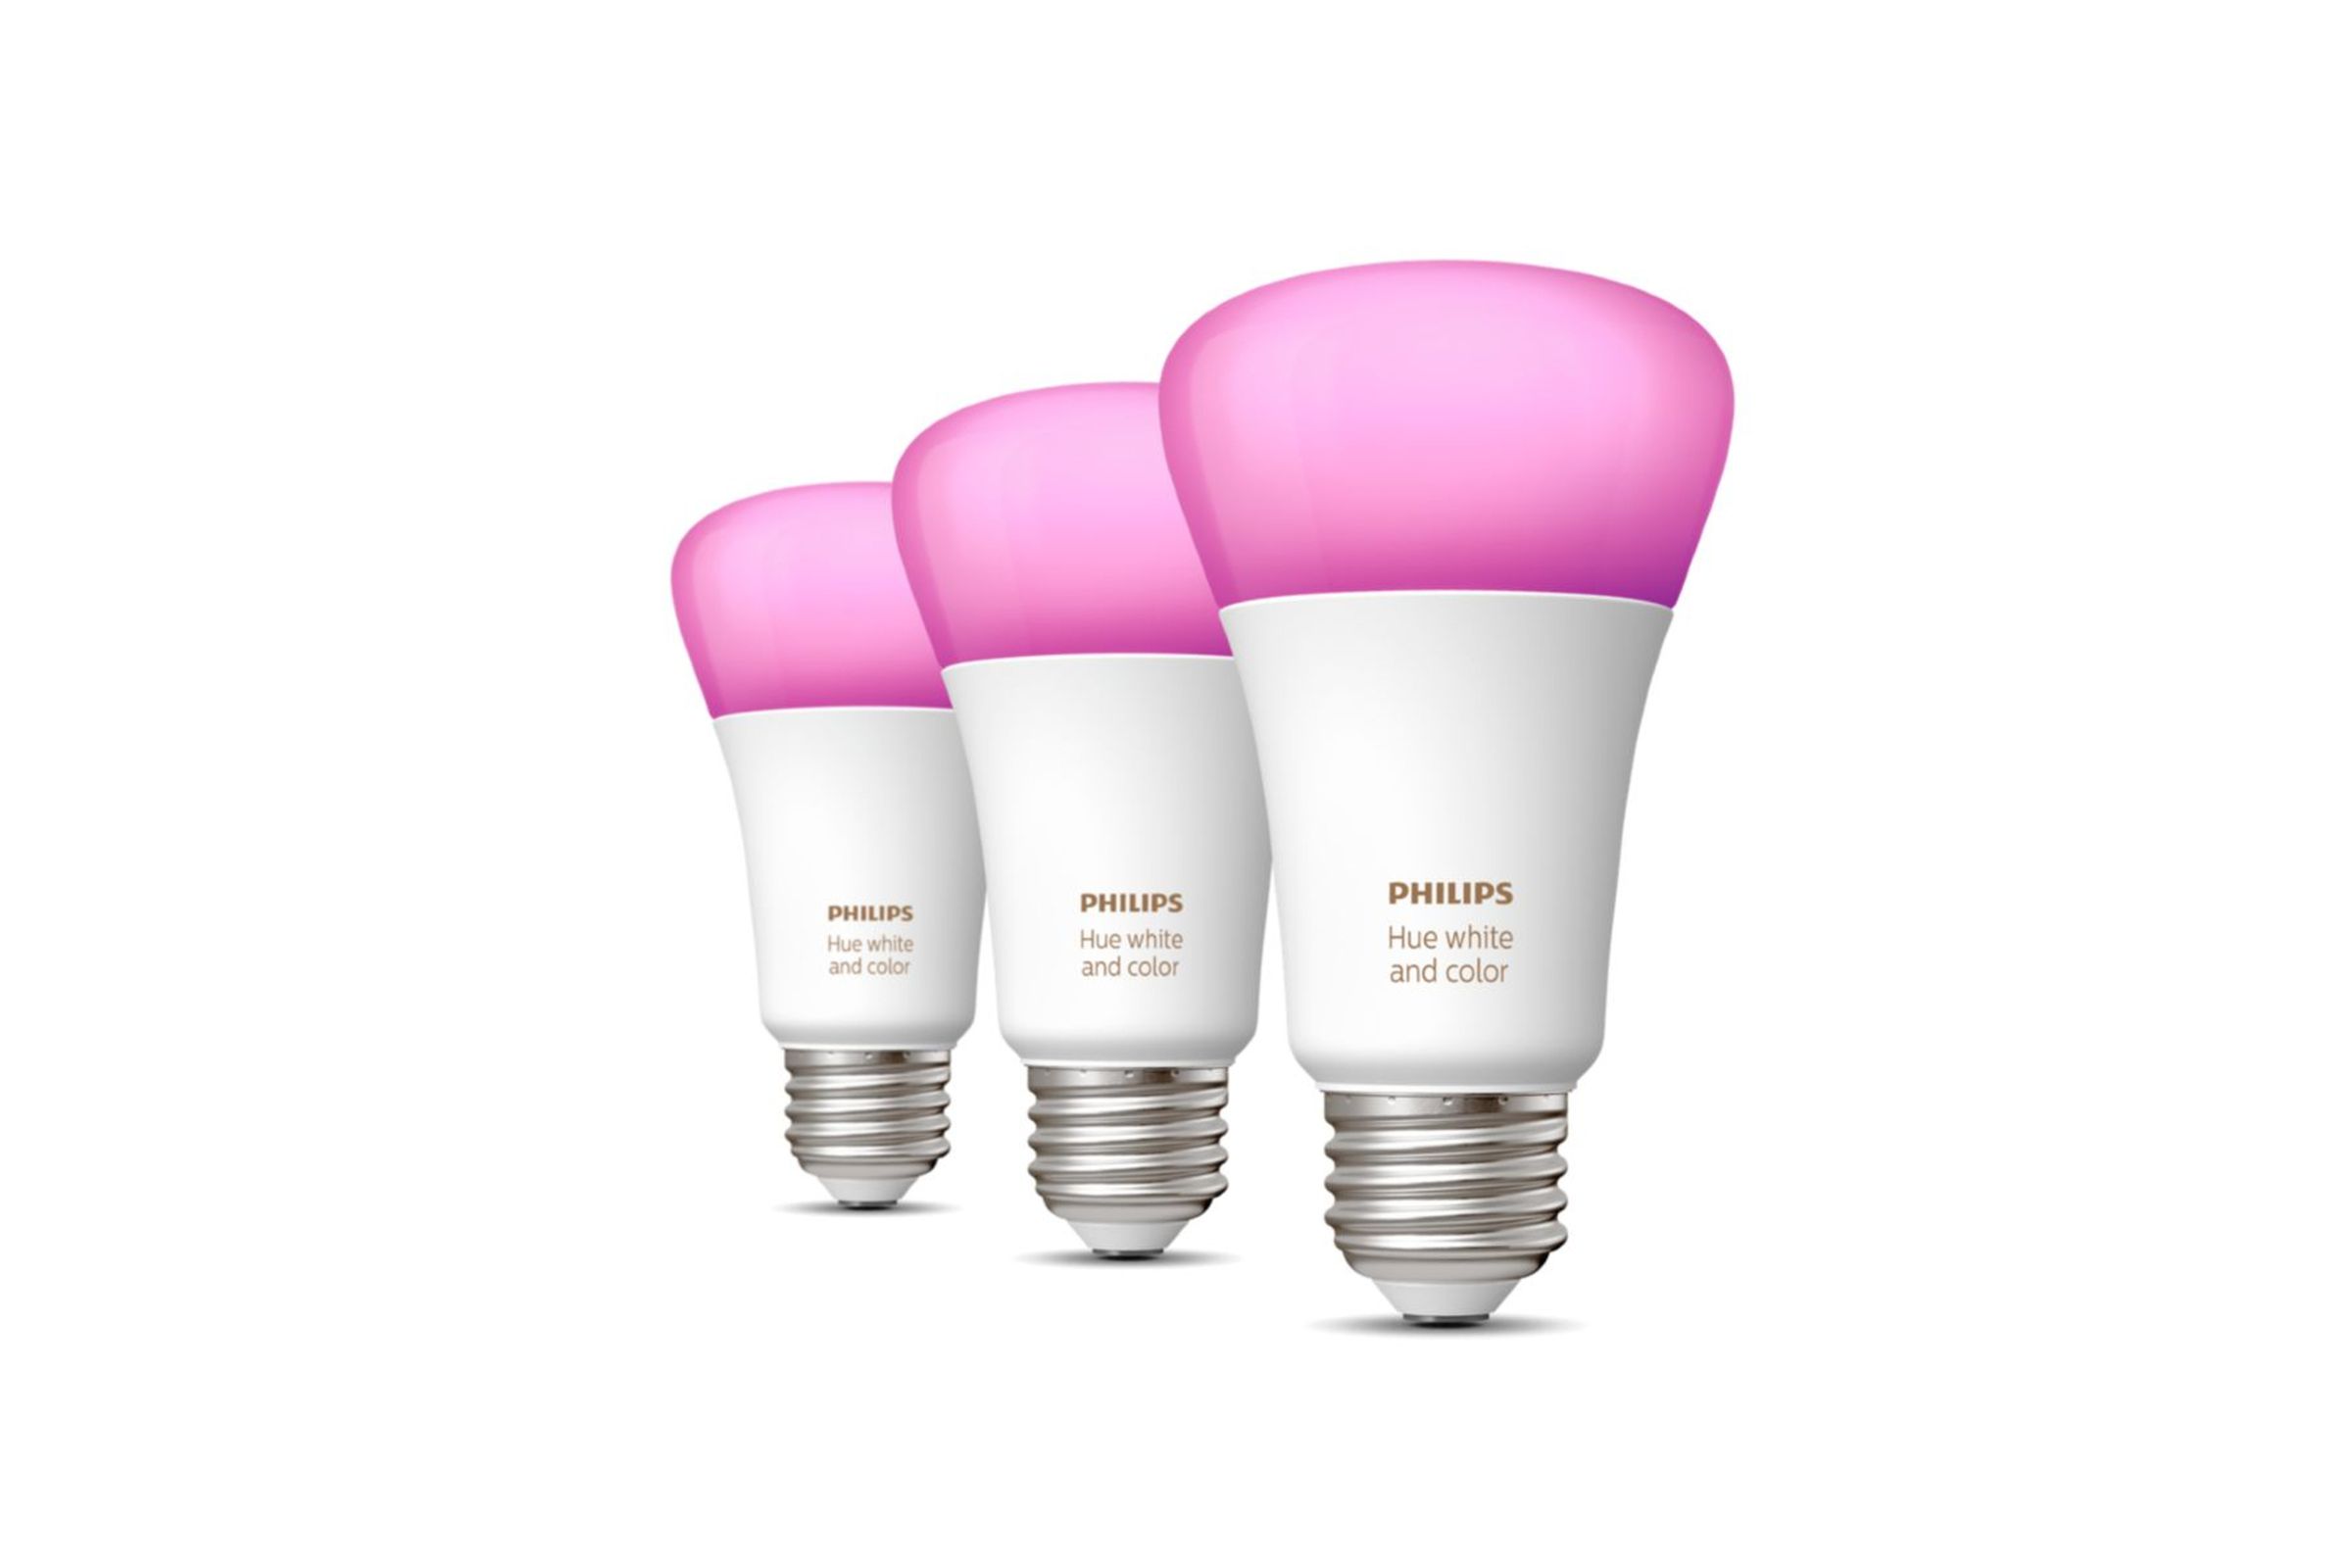 Now through September 12th, you can buy three Philips Hue bulbs for the price of two. 